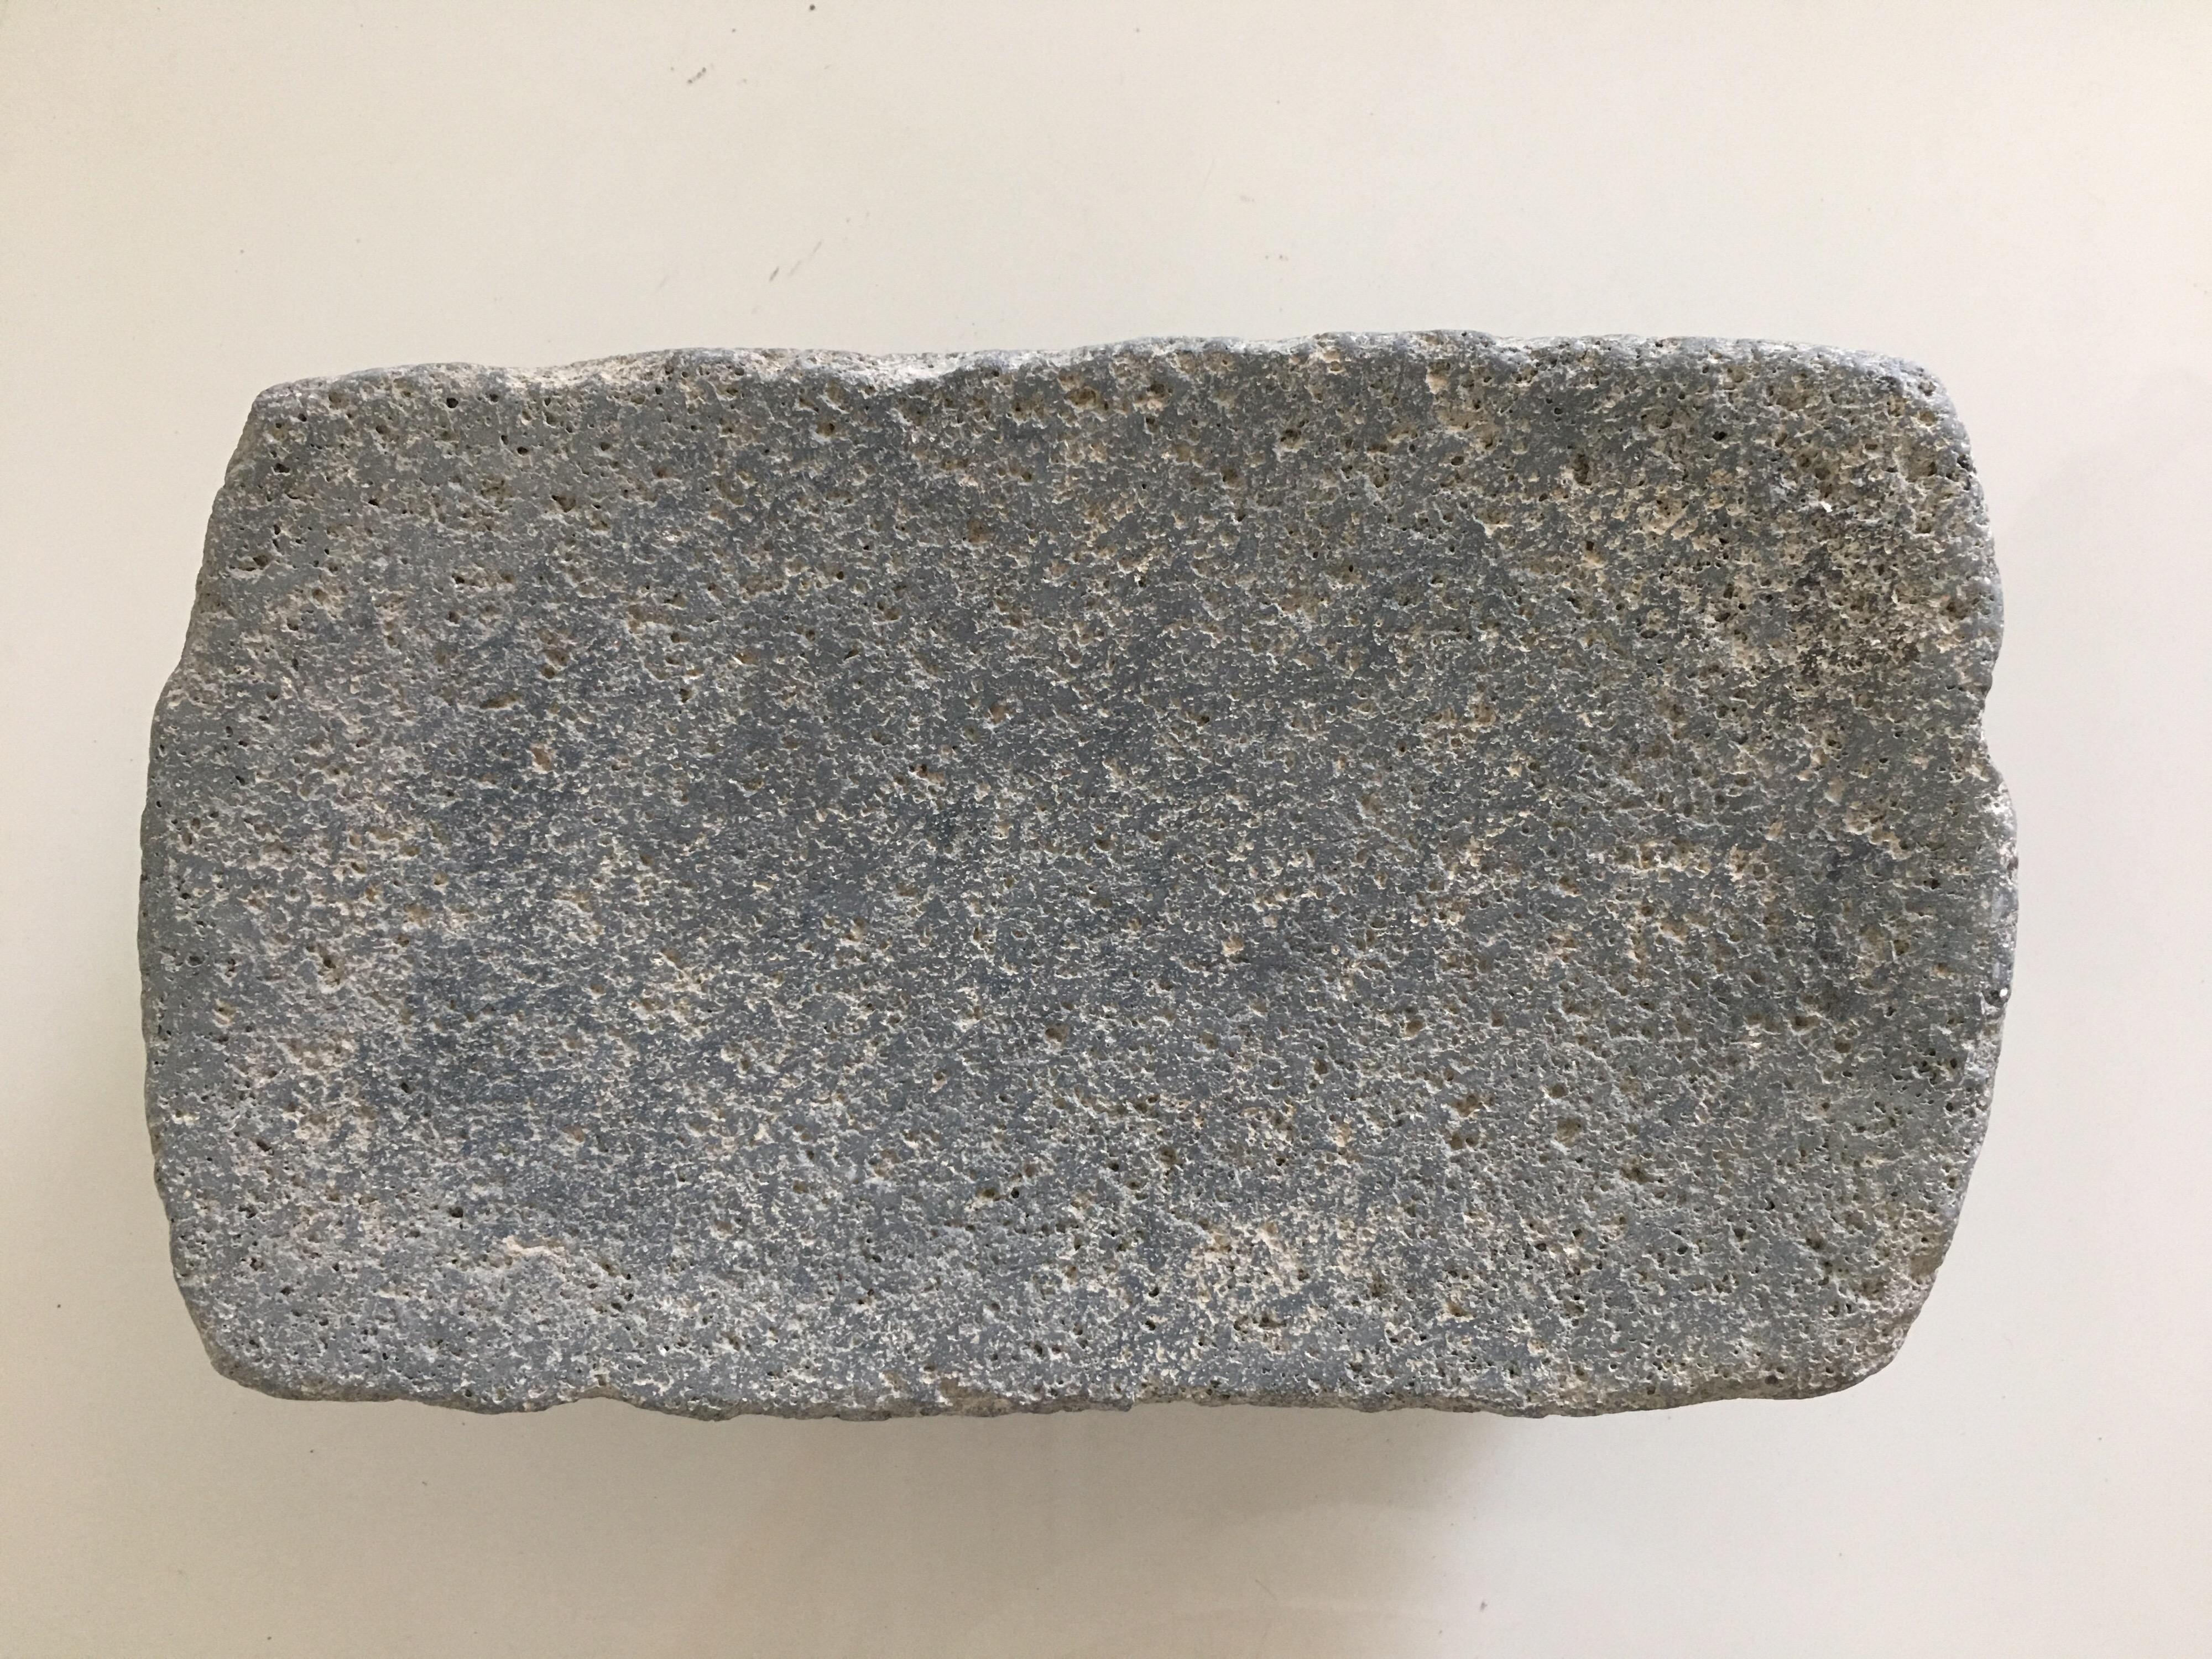 Primitive Antique Grinding Stone from Mexico